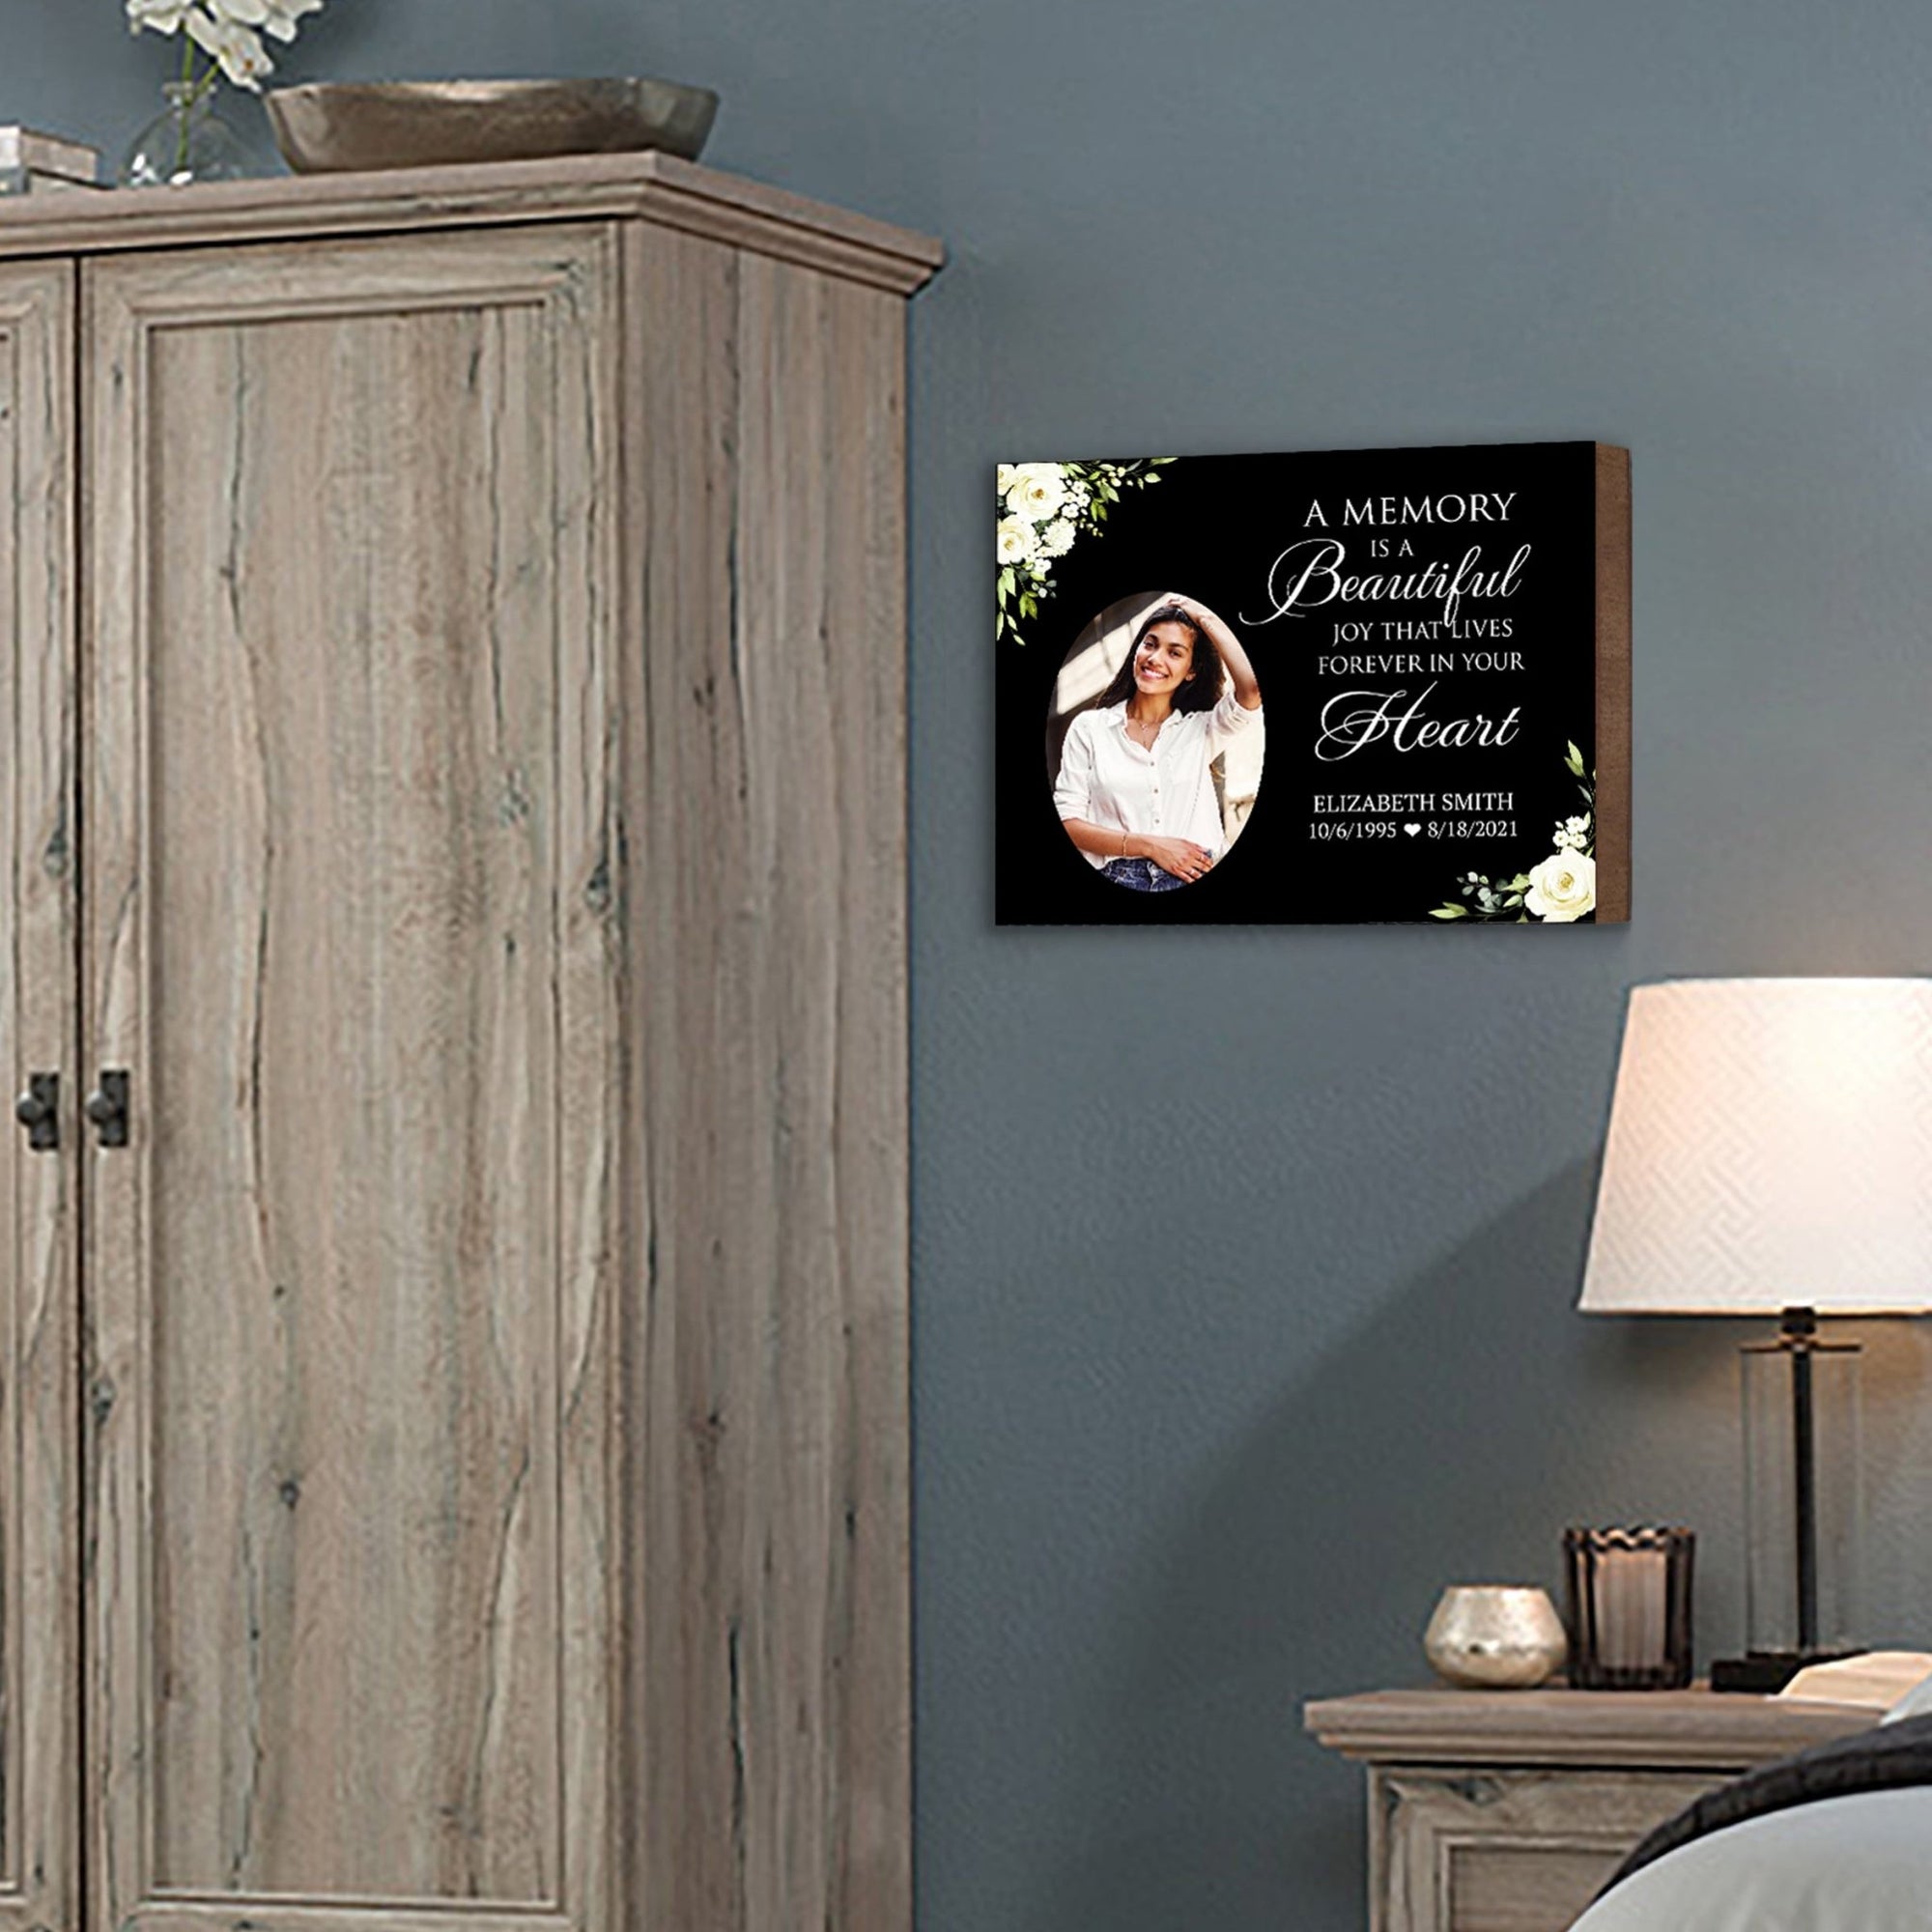 Personalized Human Memorial Black Photo & Inspirational Verse Bereavement Wall Décor & Sympathy Gift Ideas - A Memory Is A Beautiful - LifeSong Milestones